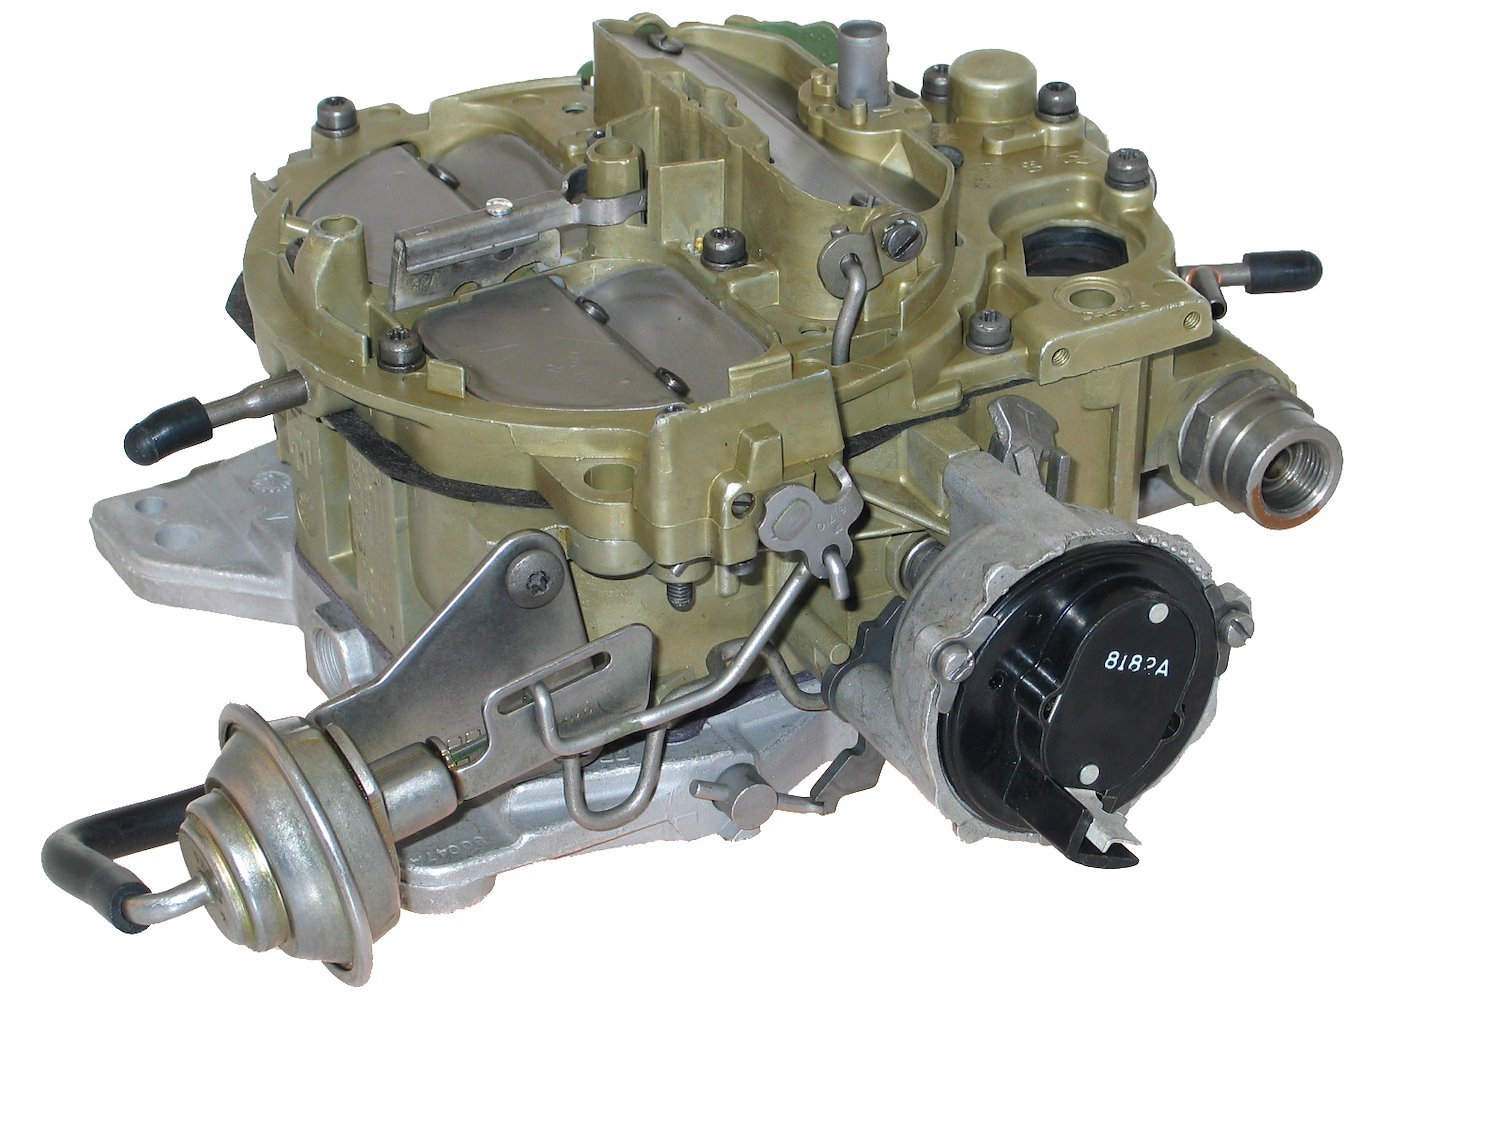 3-3798 Rochester Remanufactured Carburetor, M4ME, Light Duty, Open Loop-Style